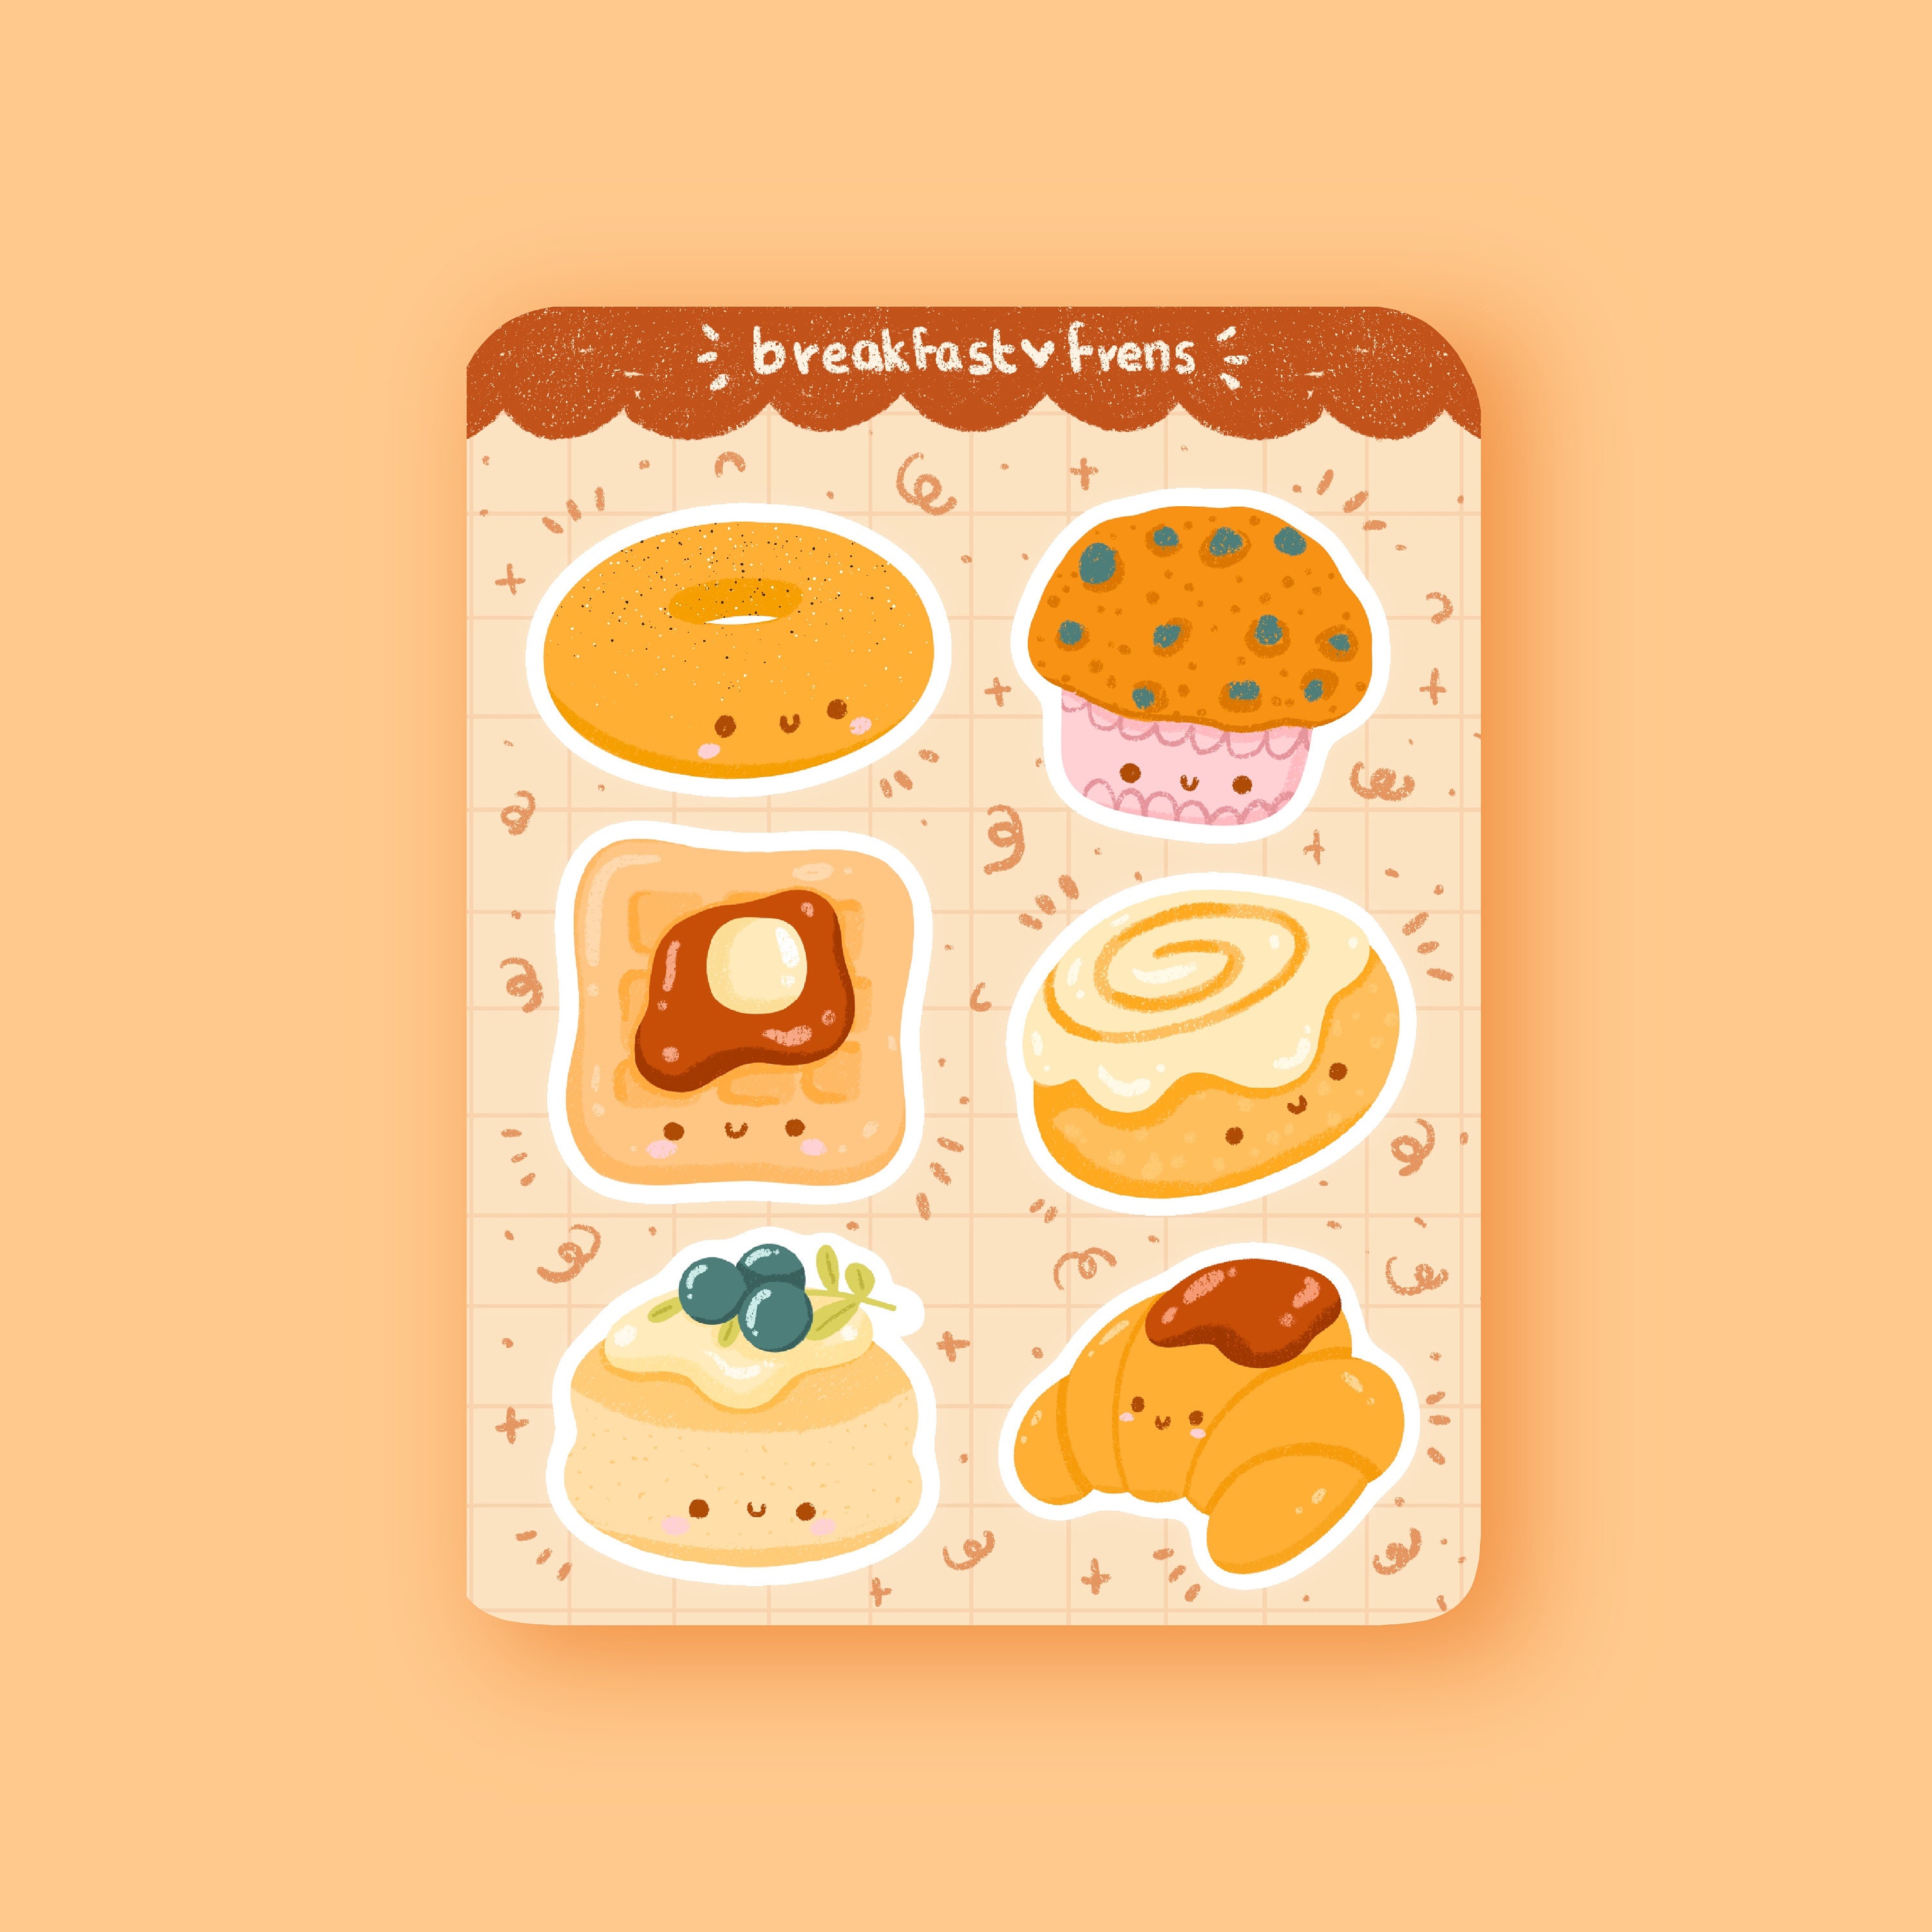 Cute food Sticker pack Printable stickers for kids (2497339)